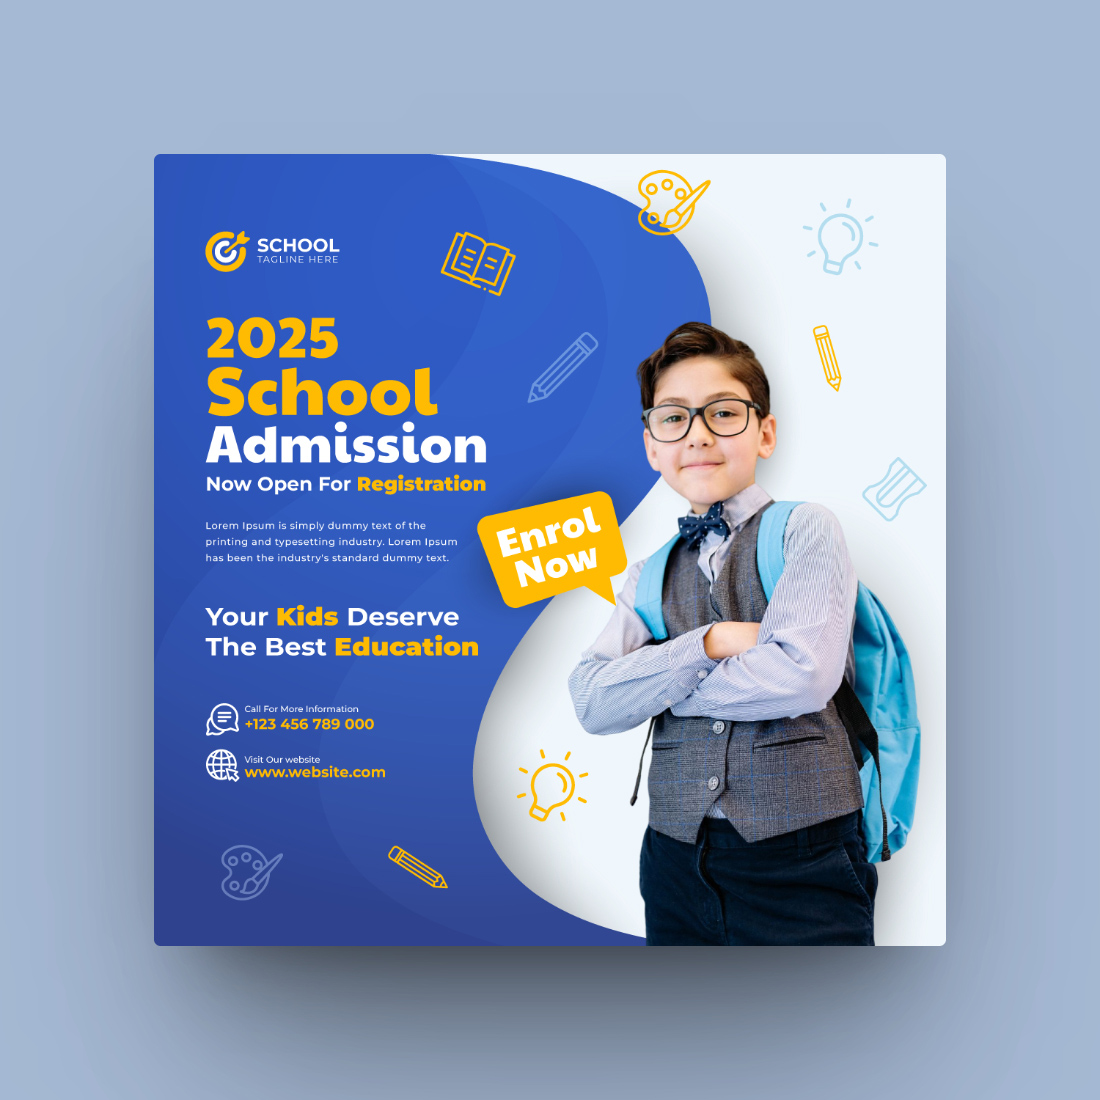 School Admission Or Kids Education Social Media Post Template cover image.